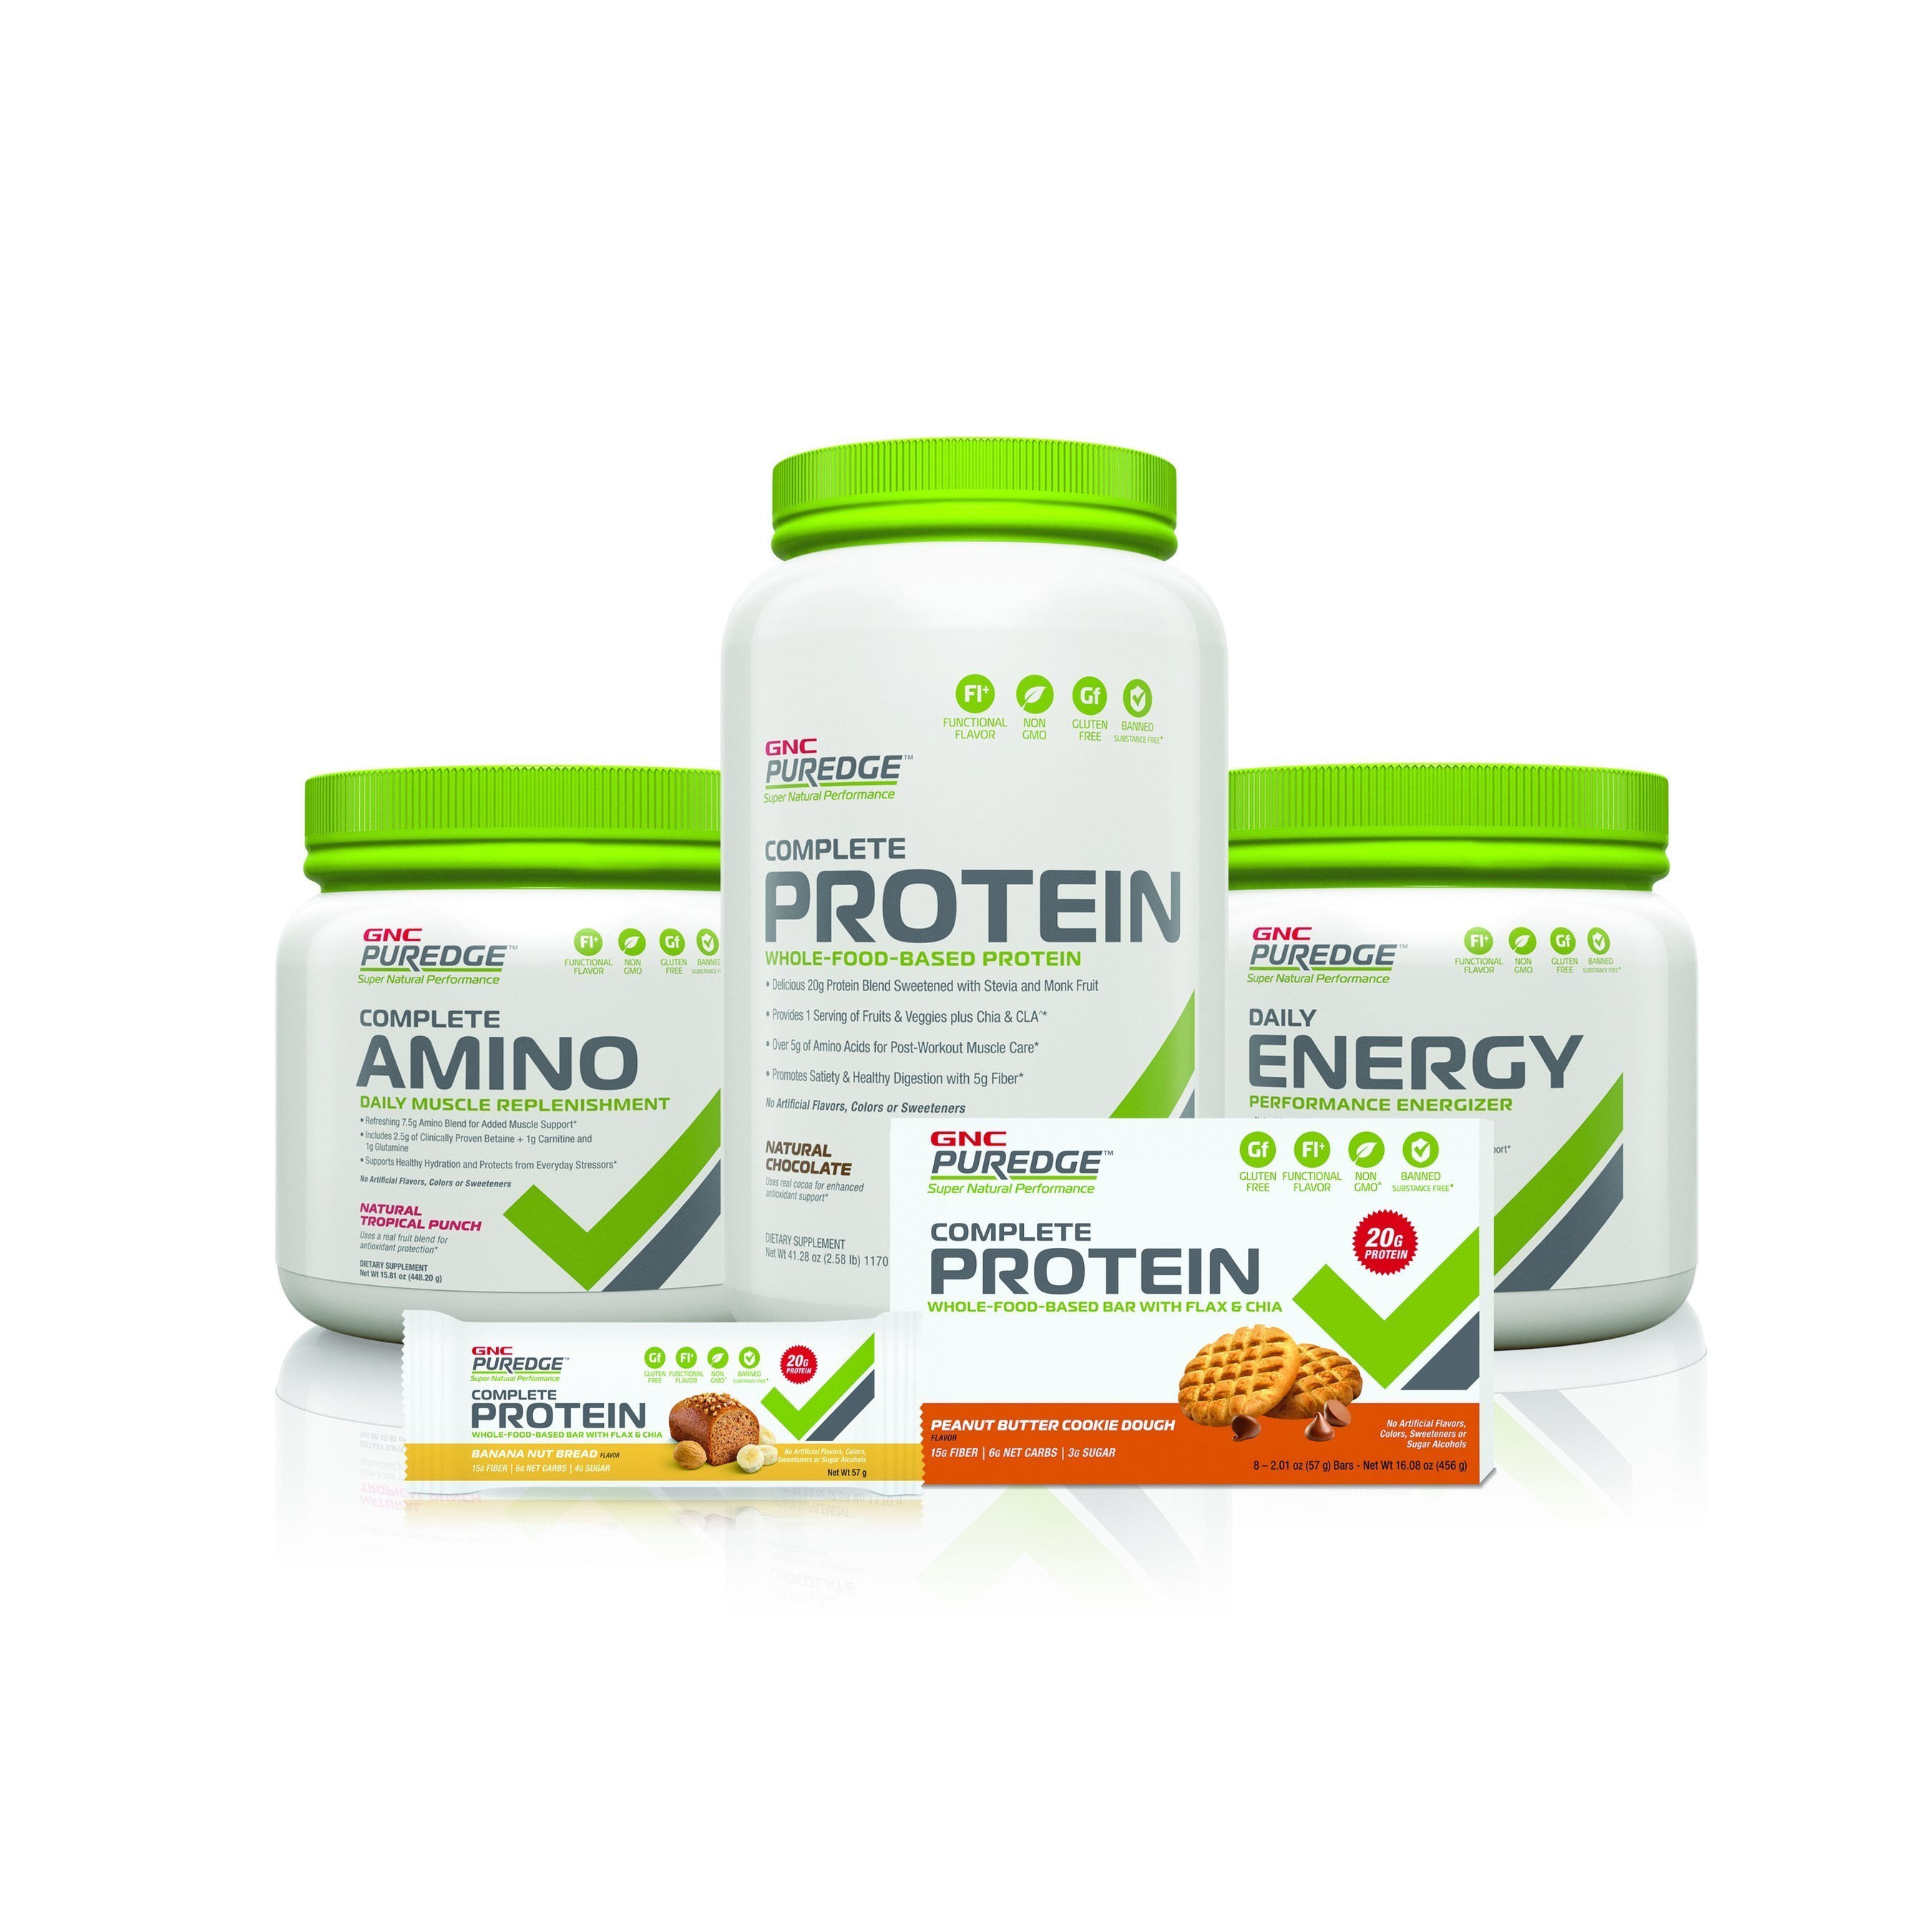 GNC PUREDGE(TM) sets the new standard for whole-food-based sports nutrition products.